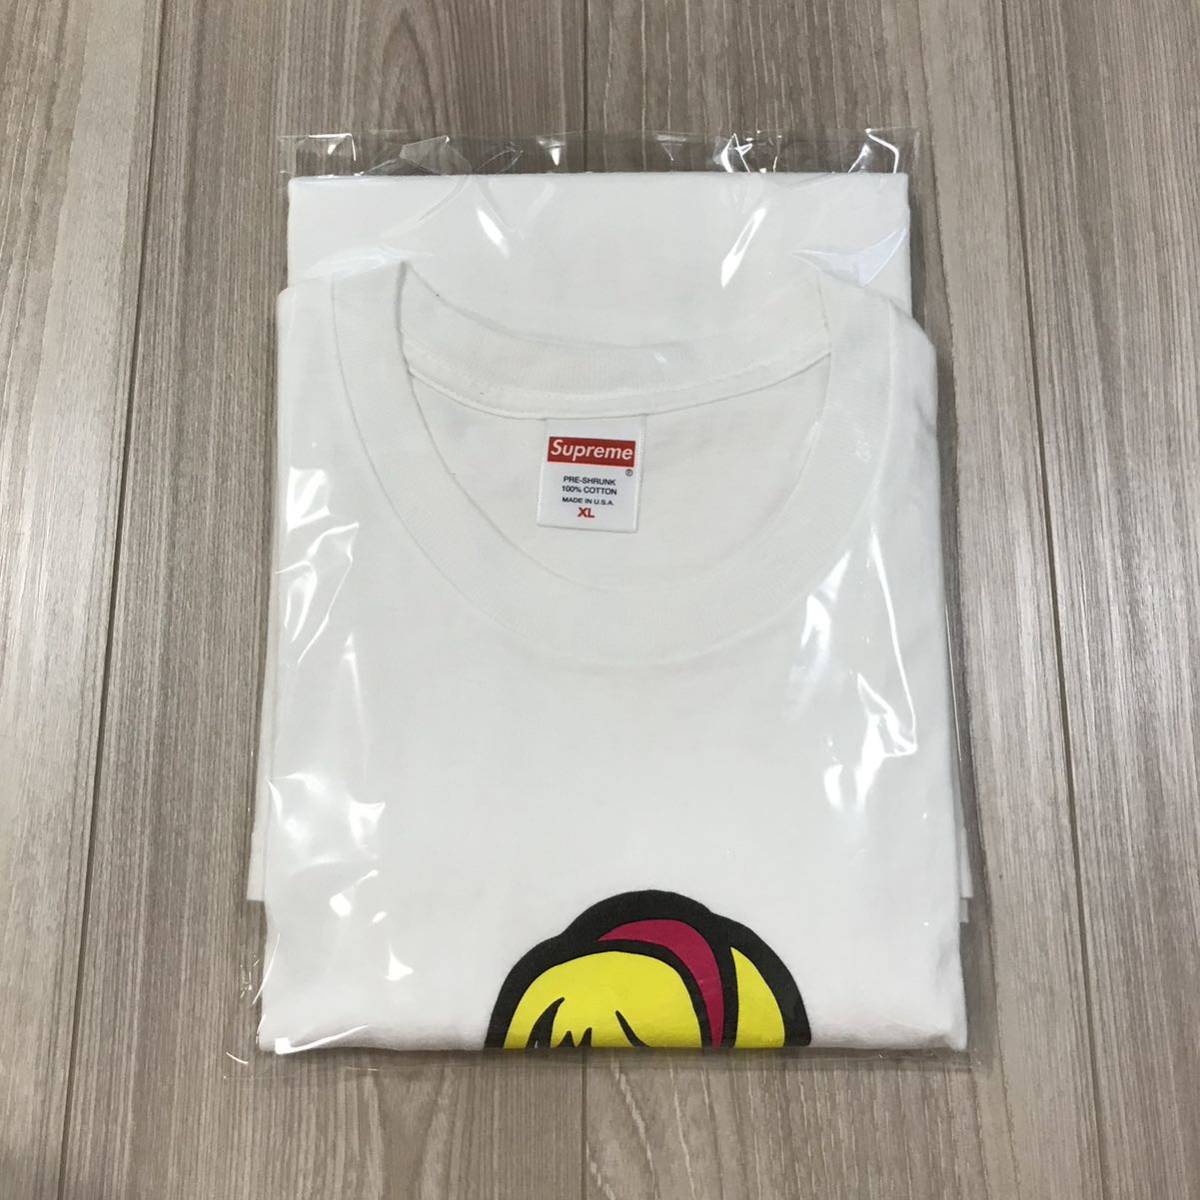 Supreme Suzie Switchblade Tee New Deal Skateboards Andy Howellシュプリーム 女の子 人形  ジャケット スマホ ナイフ プリント Tシャツ